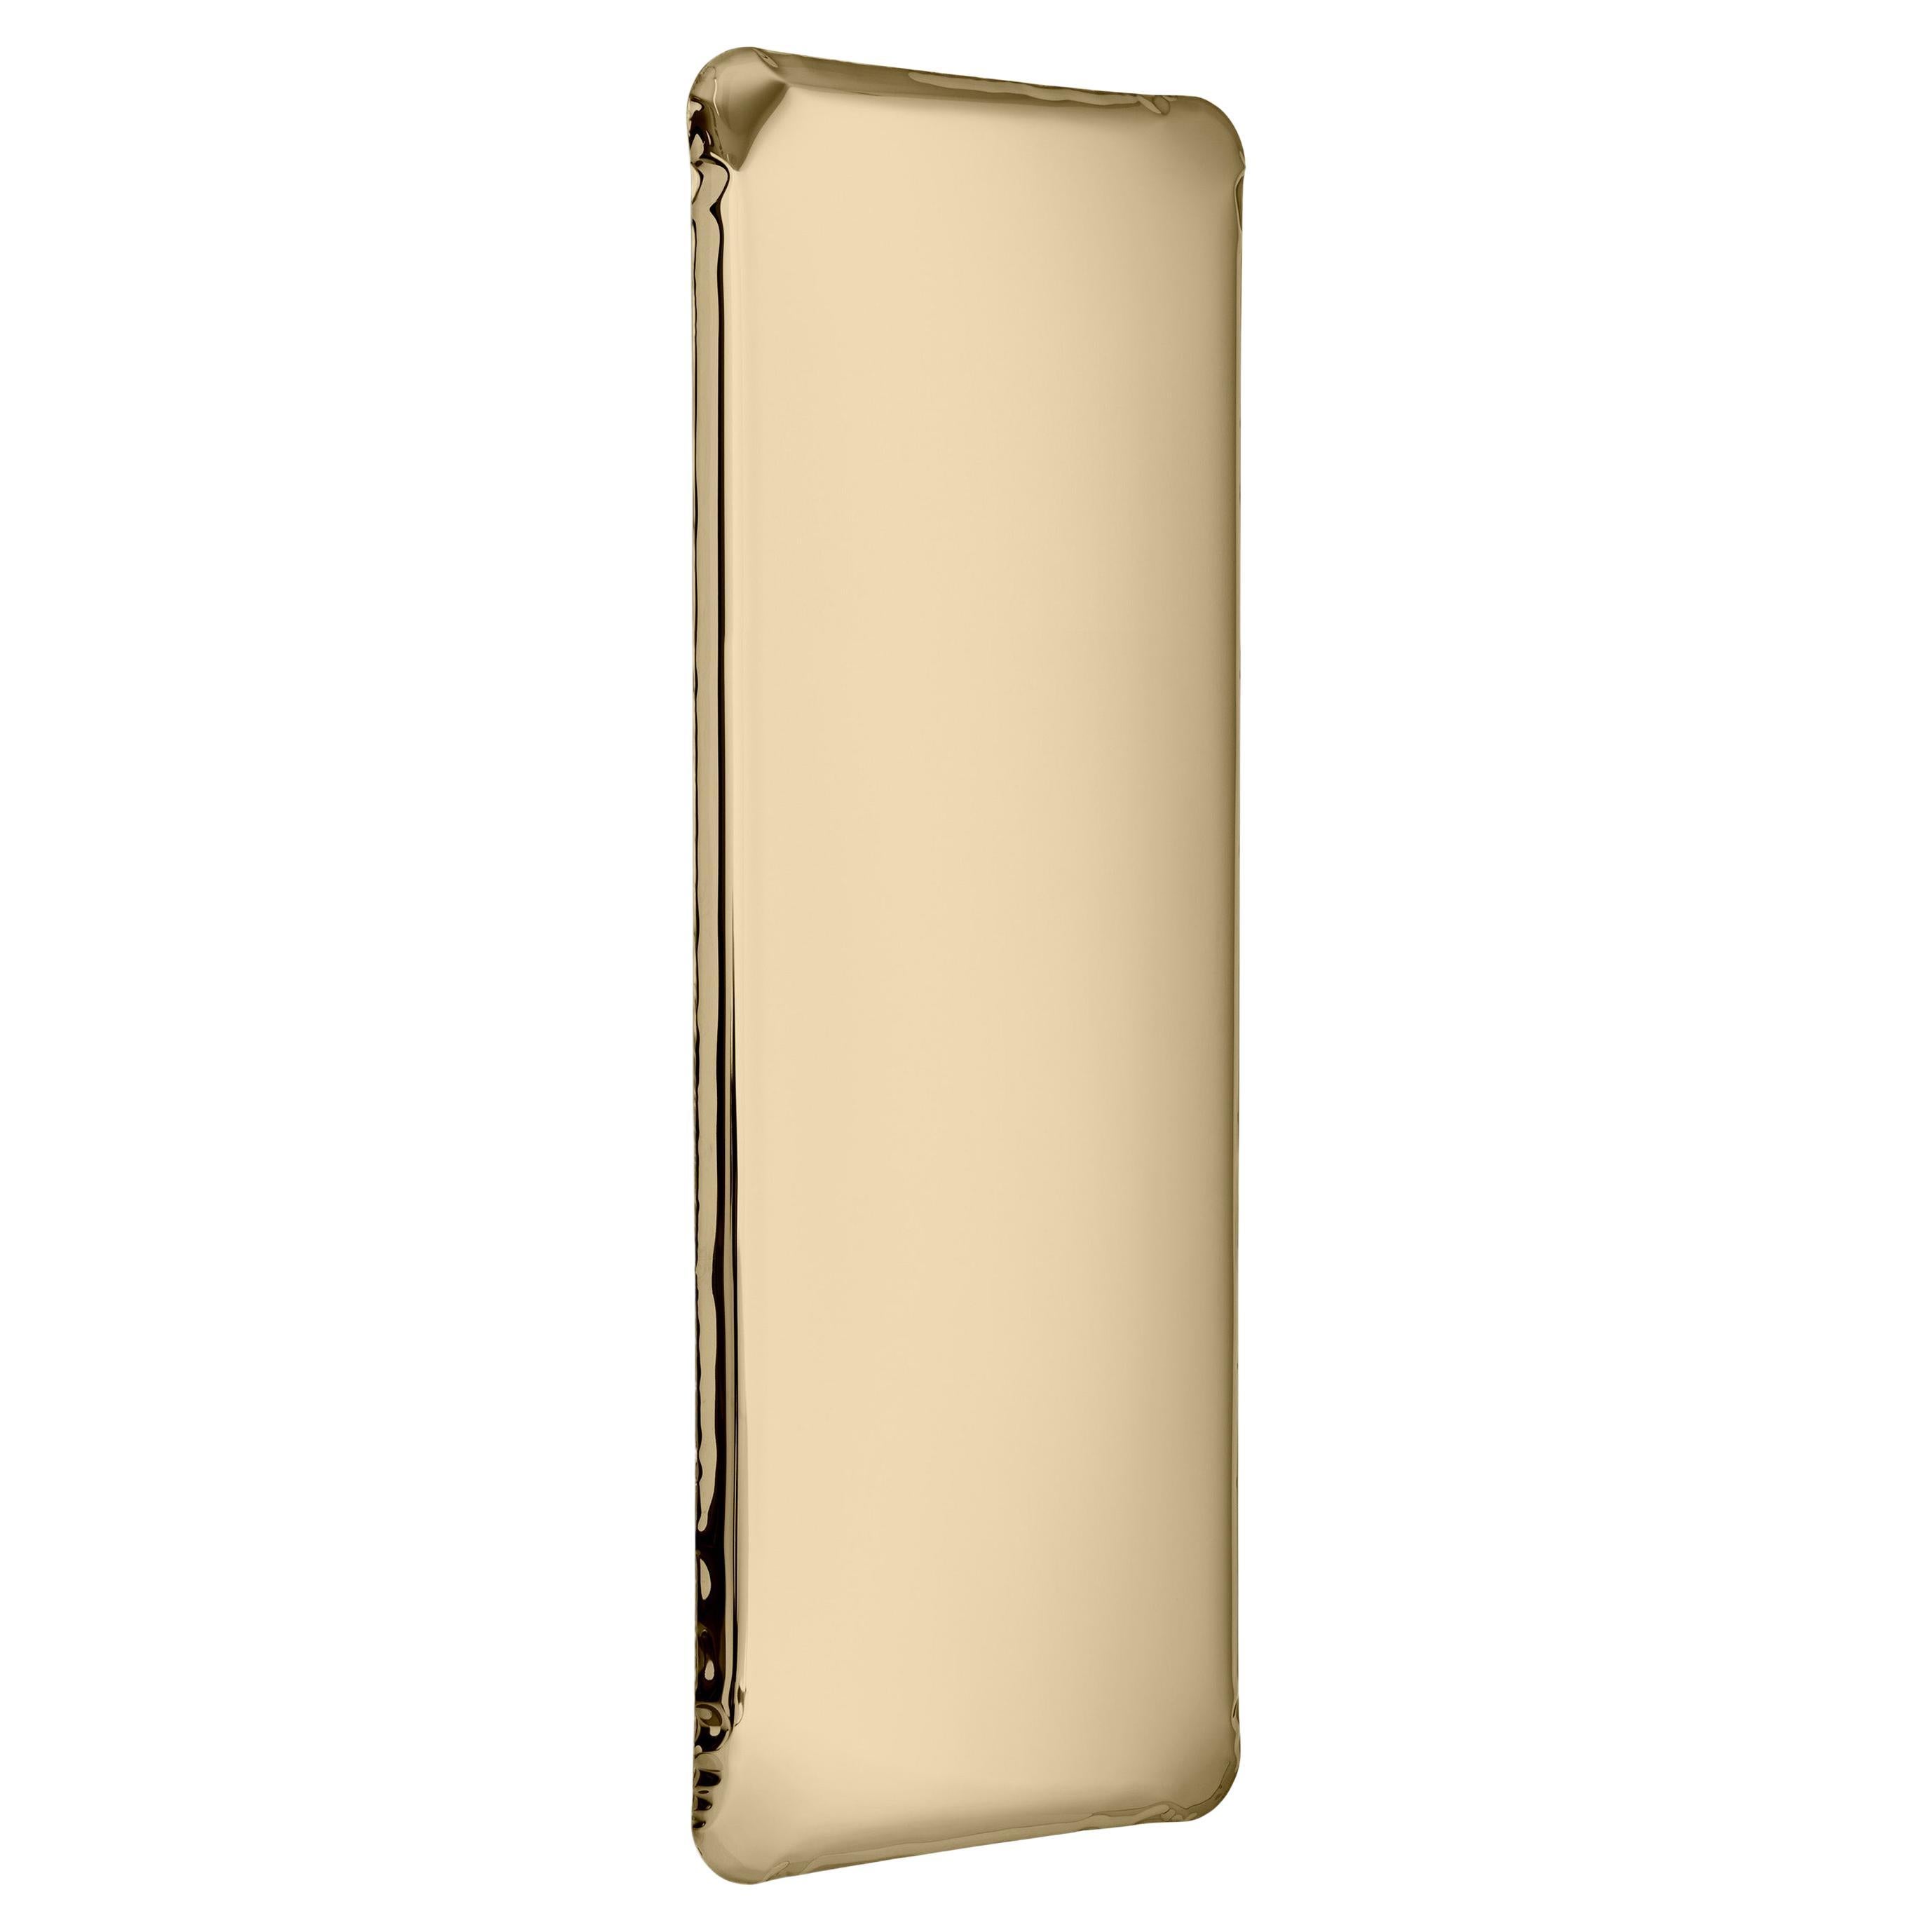 Tafla Q1 Polished Stainless Steel Classic Gold Color Wall Mirror by Zieta For Sale